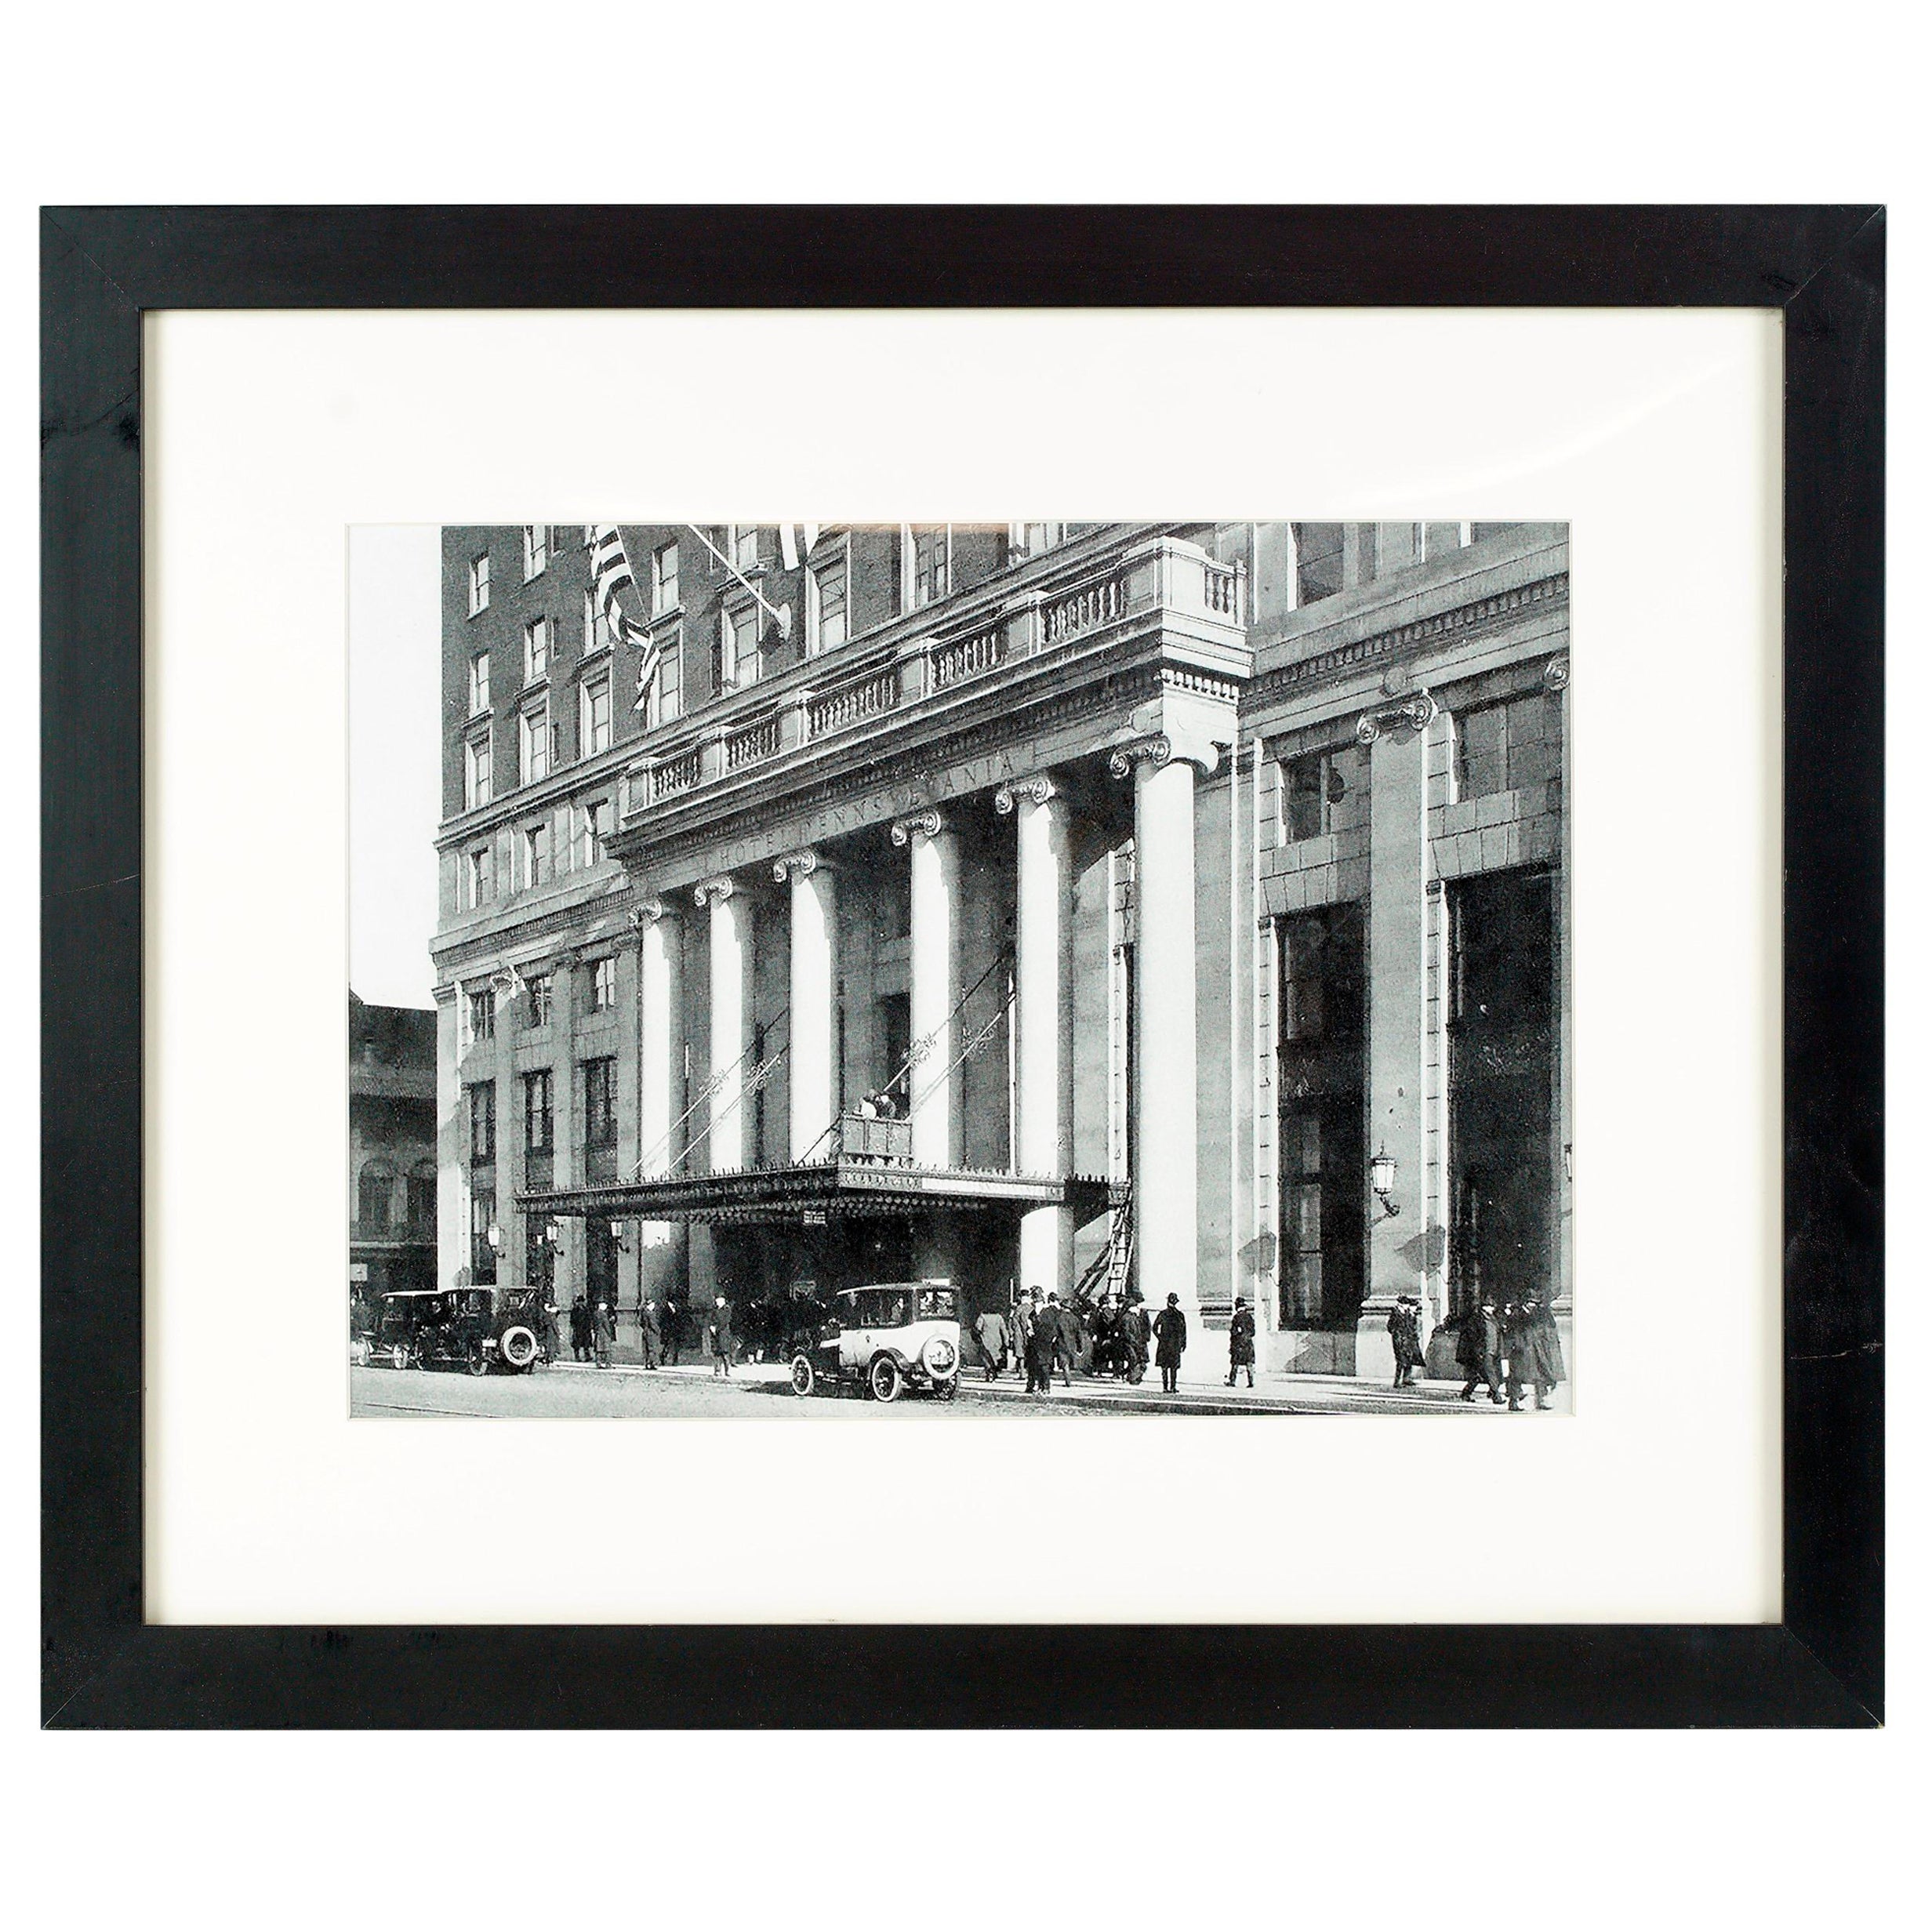 Framed Matted The Hotel Pennsylvania, NYC Photograph